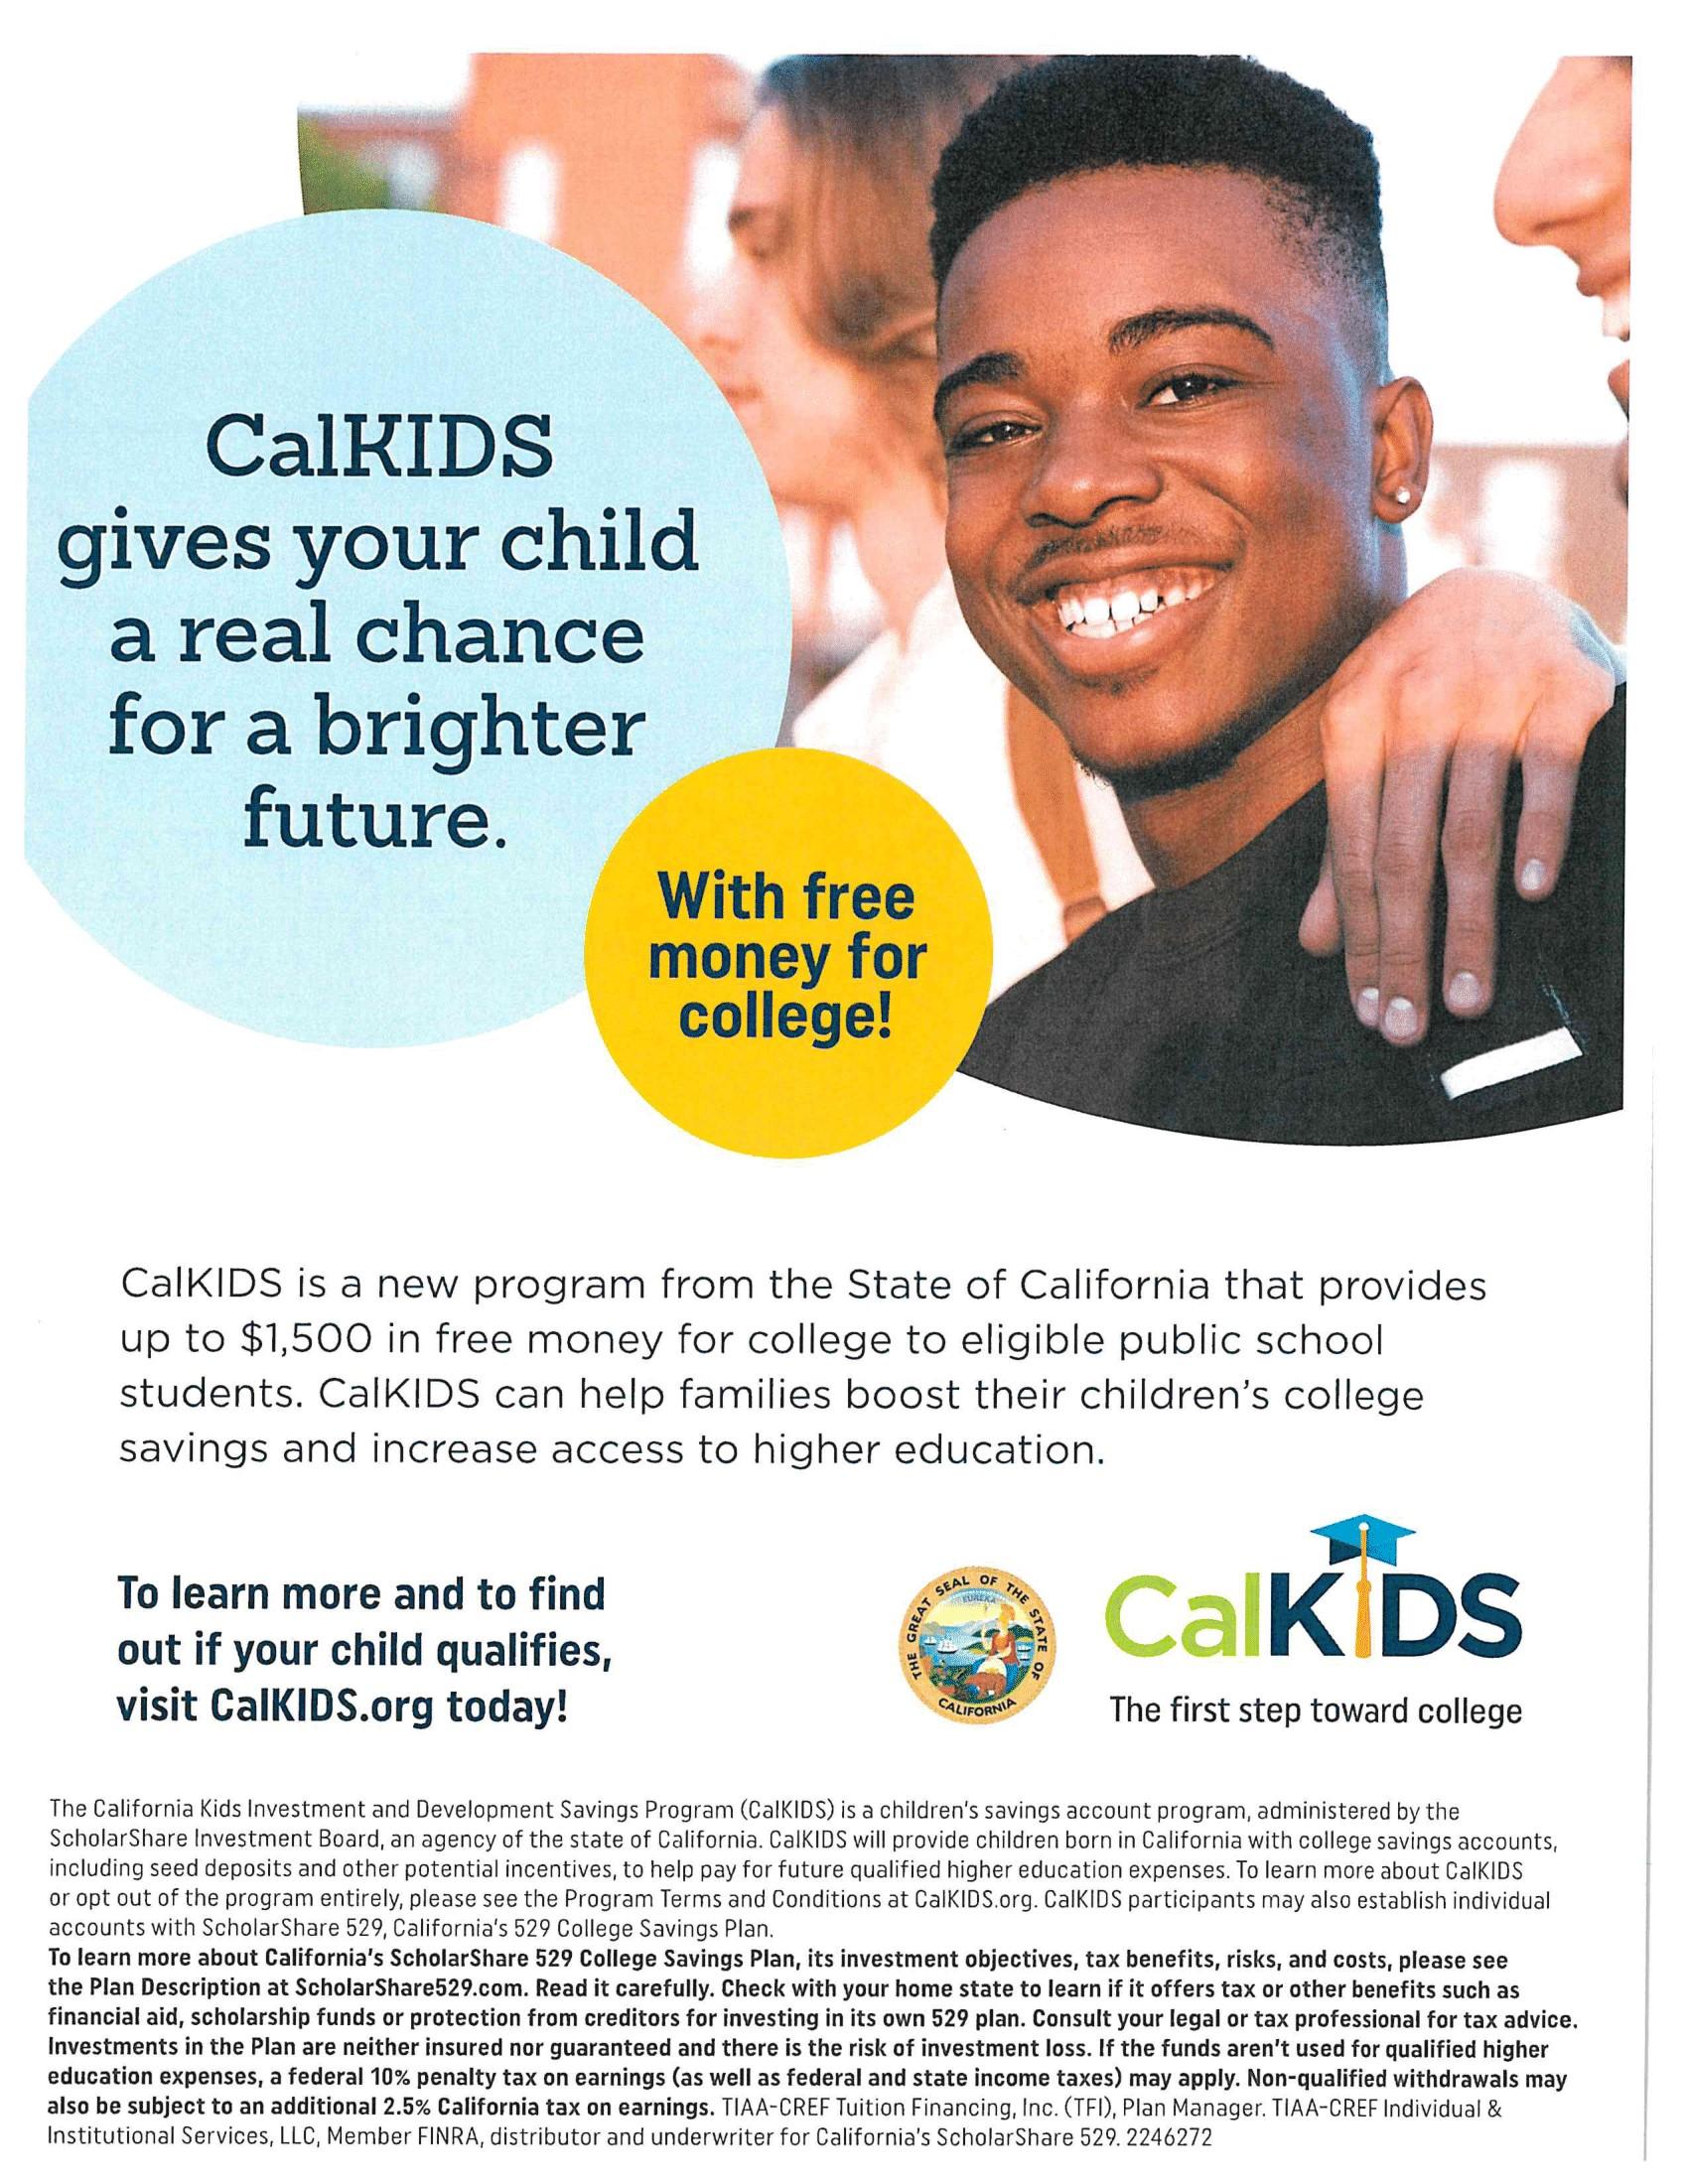 CalKids Info - A new program that students may be able to qualify for $1,500